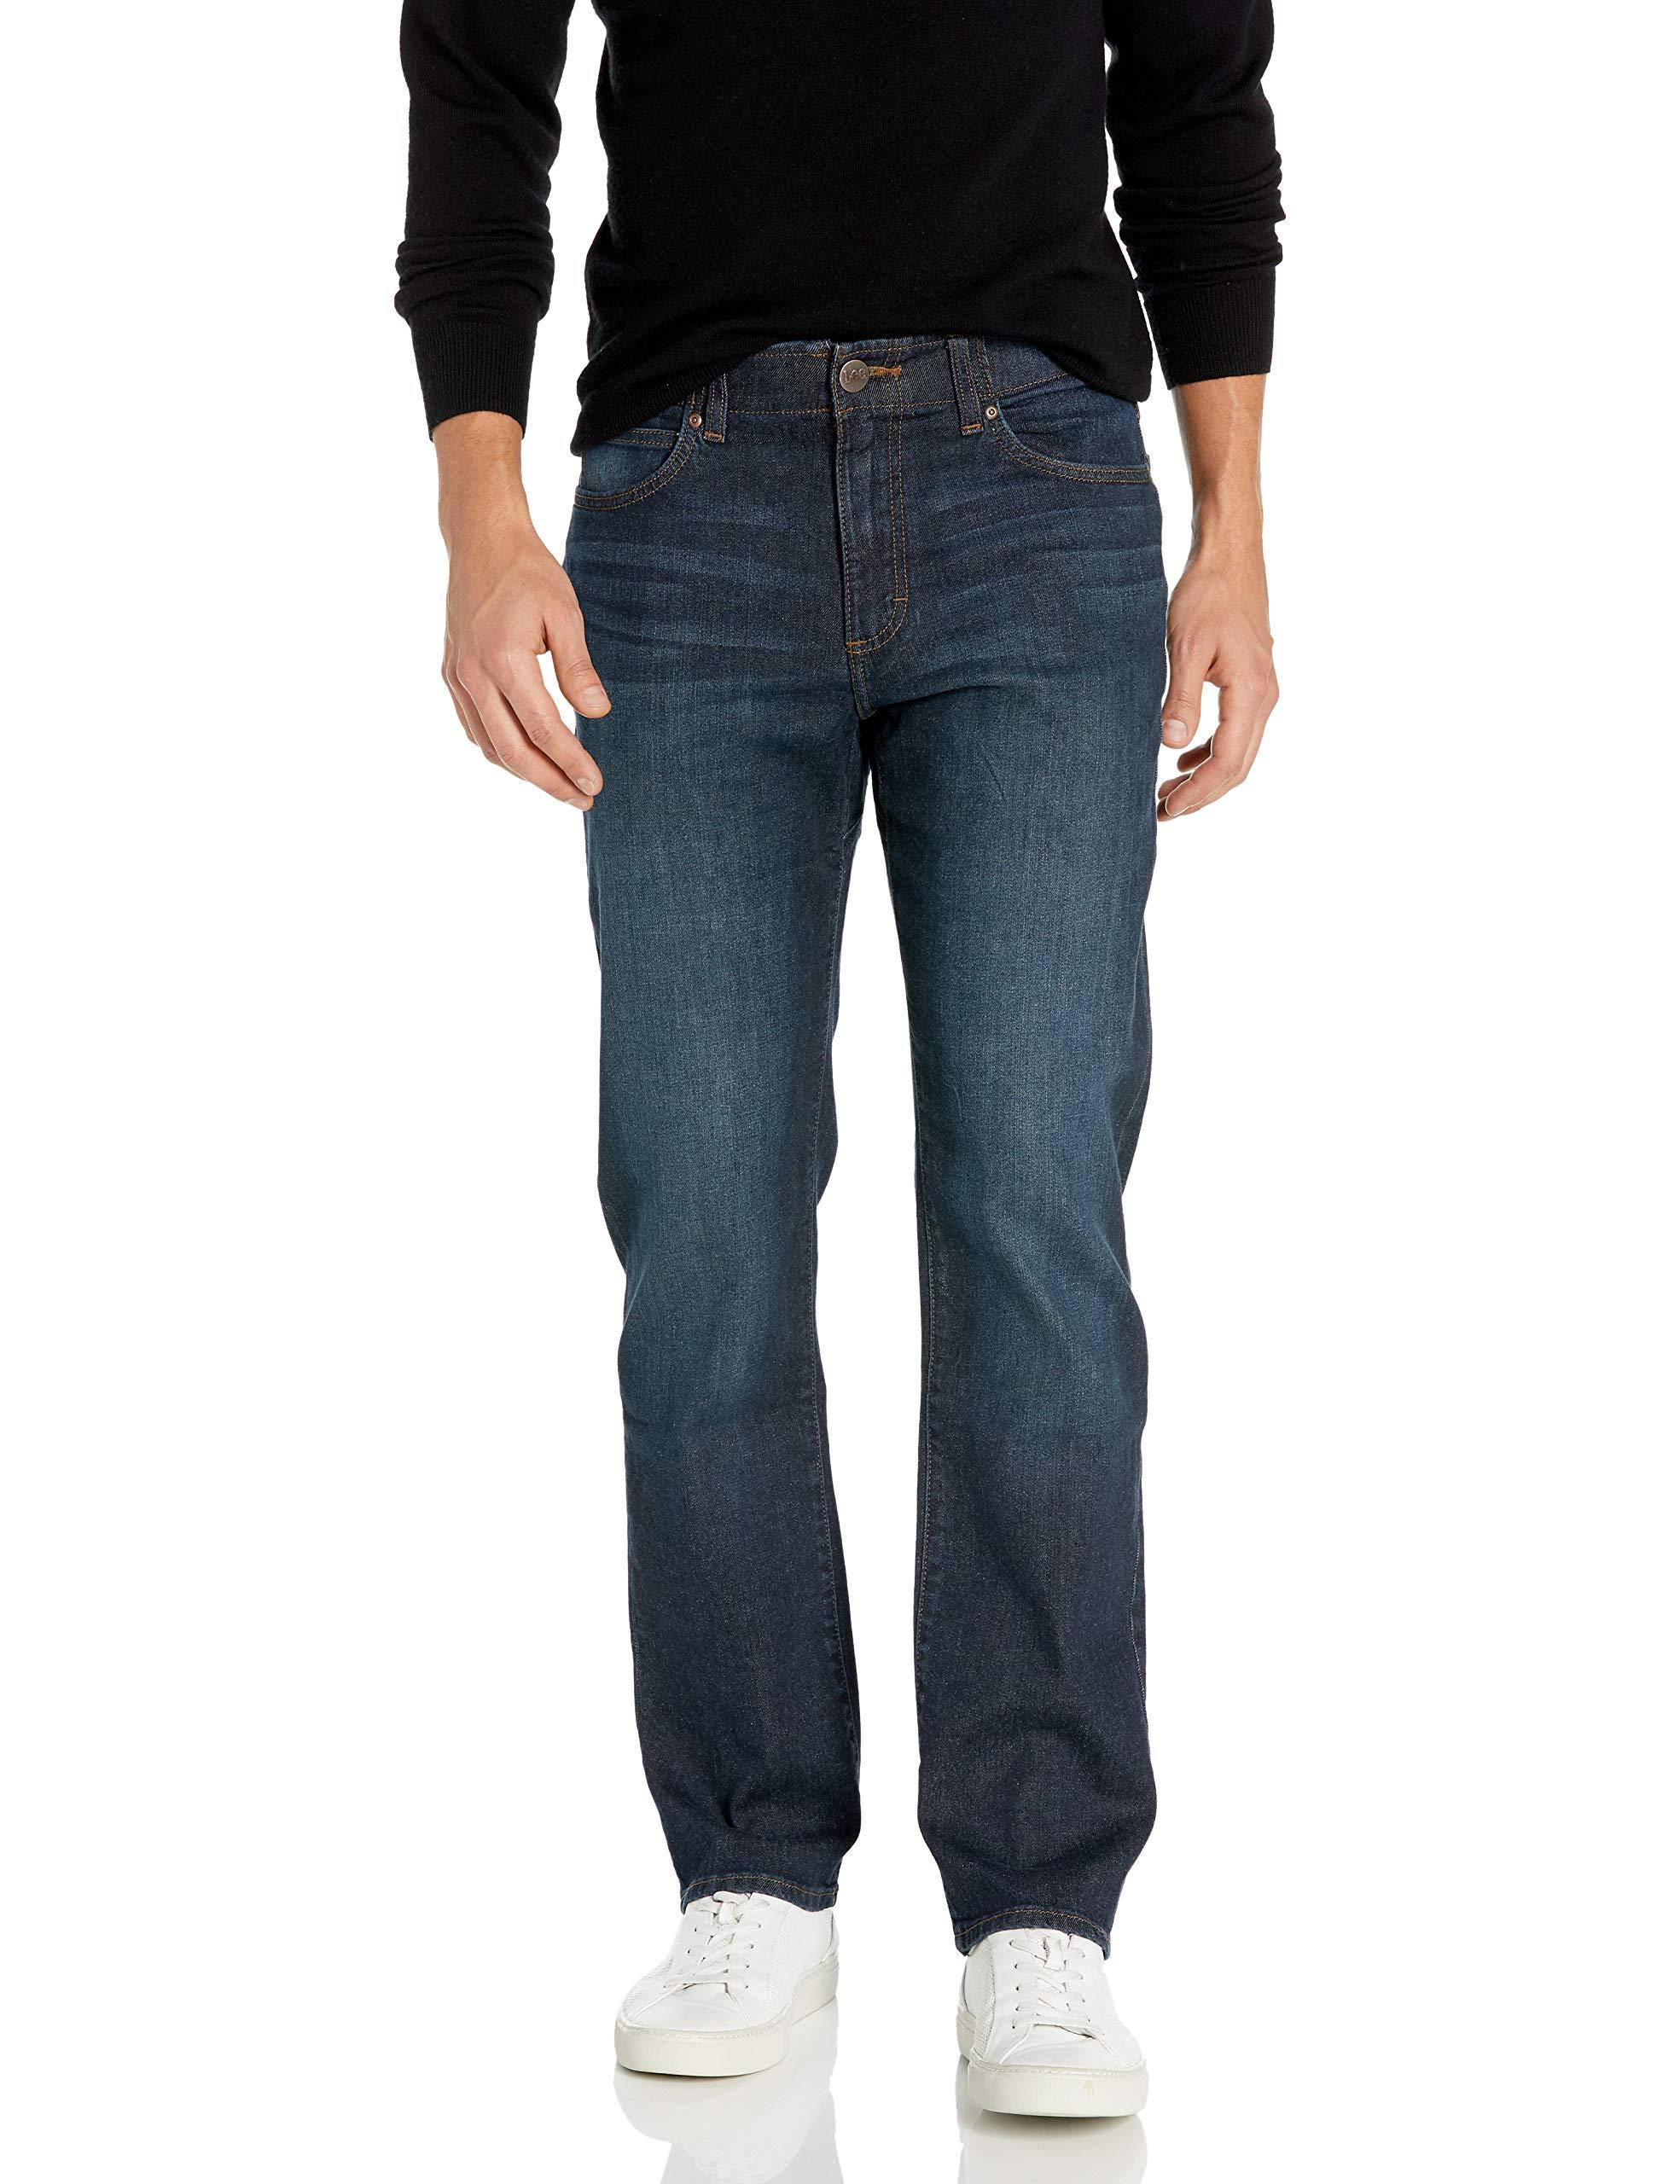 Lee Jeans Performance Series Extreme Motion Regular Fit Jean in Blue ...